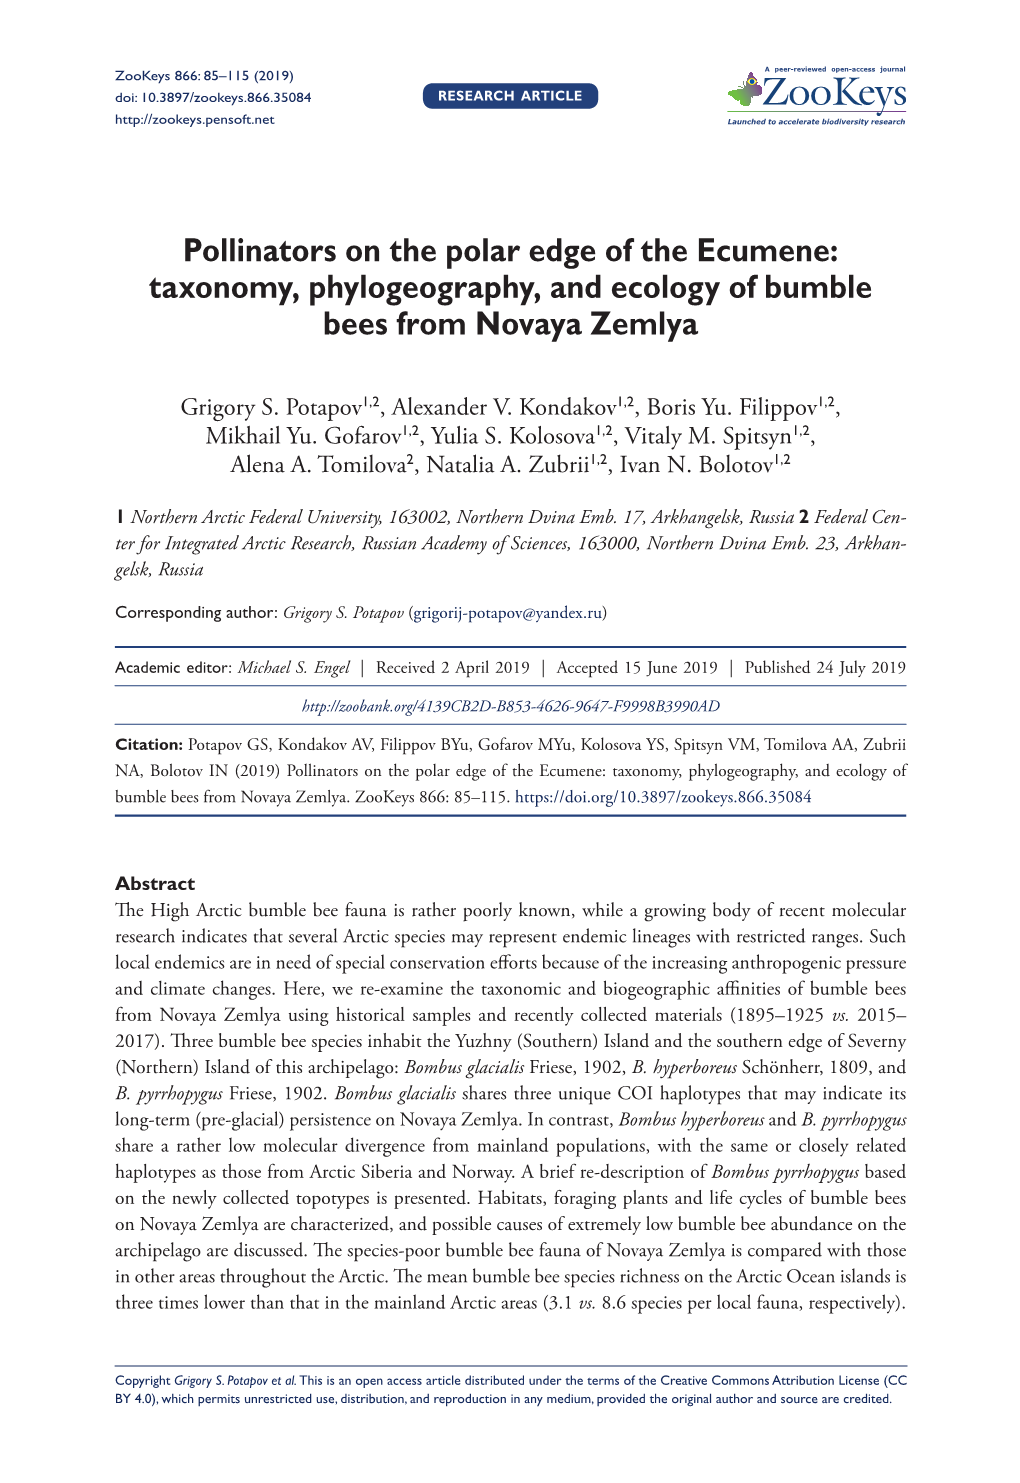 Taxonomy, Phylogeography, and Ecology of